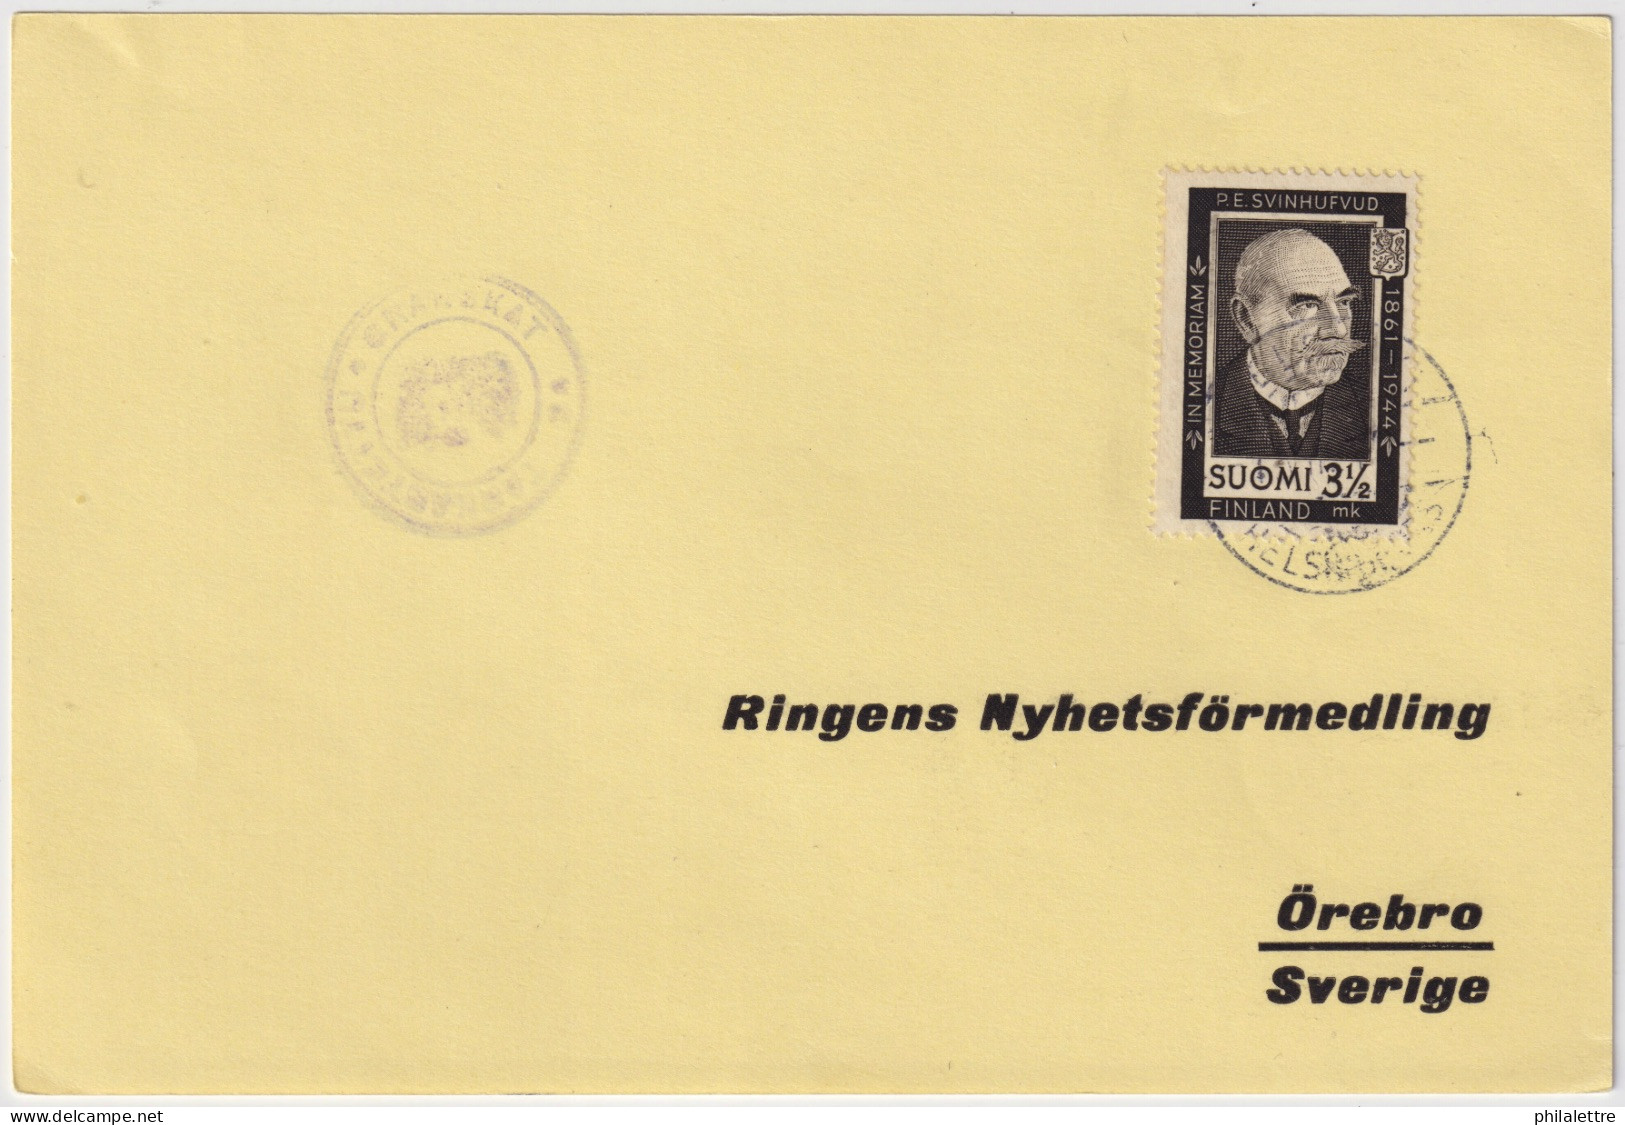 FINLAND - 1944 - Facit F288 3.50M Pdt Svinhufvud On First Day Card From Helsinki To Örebro, Sweden (Censored) - FDC